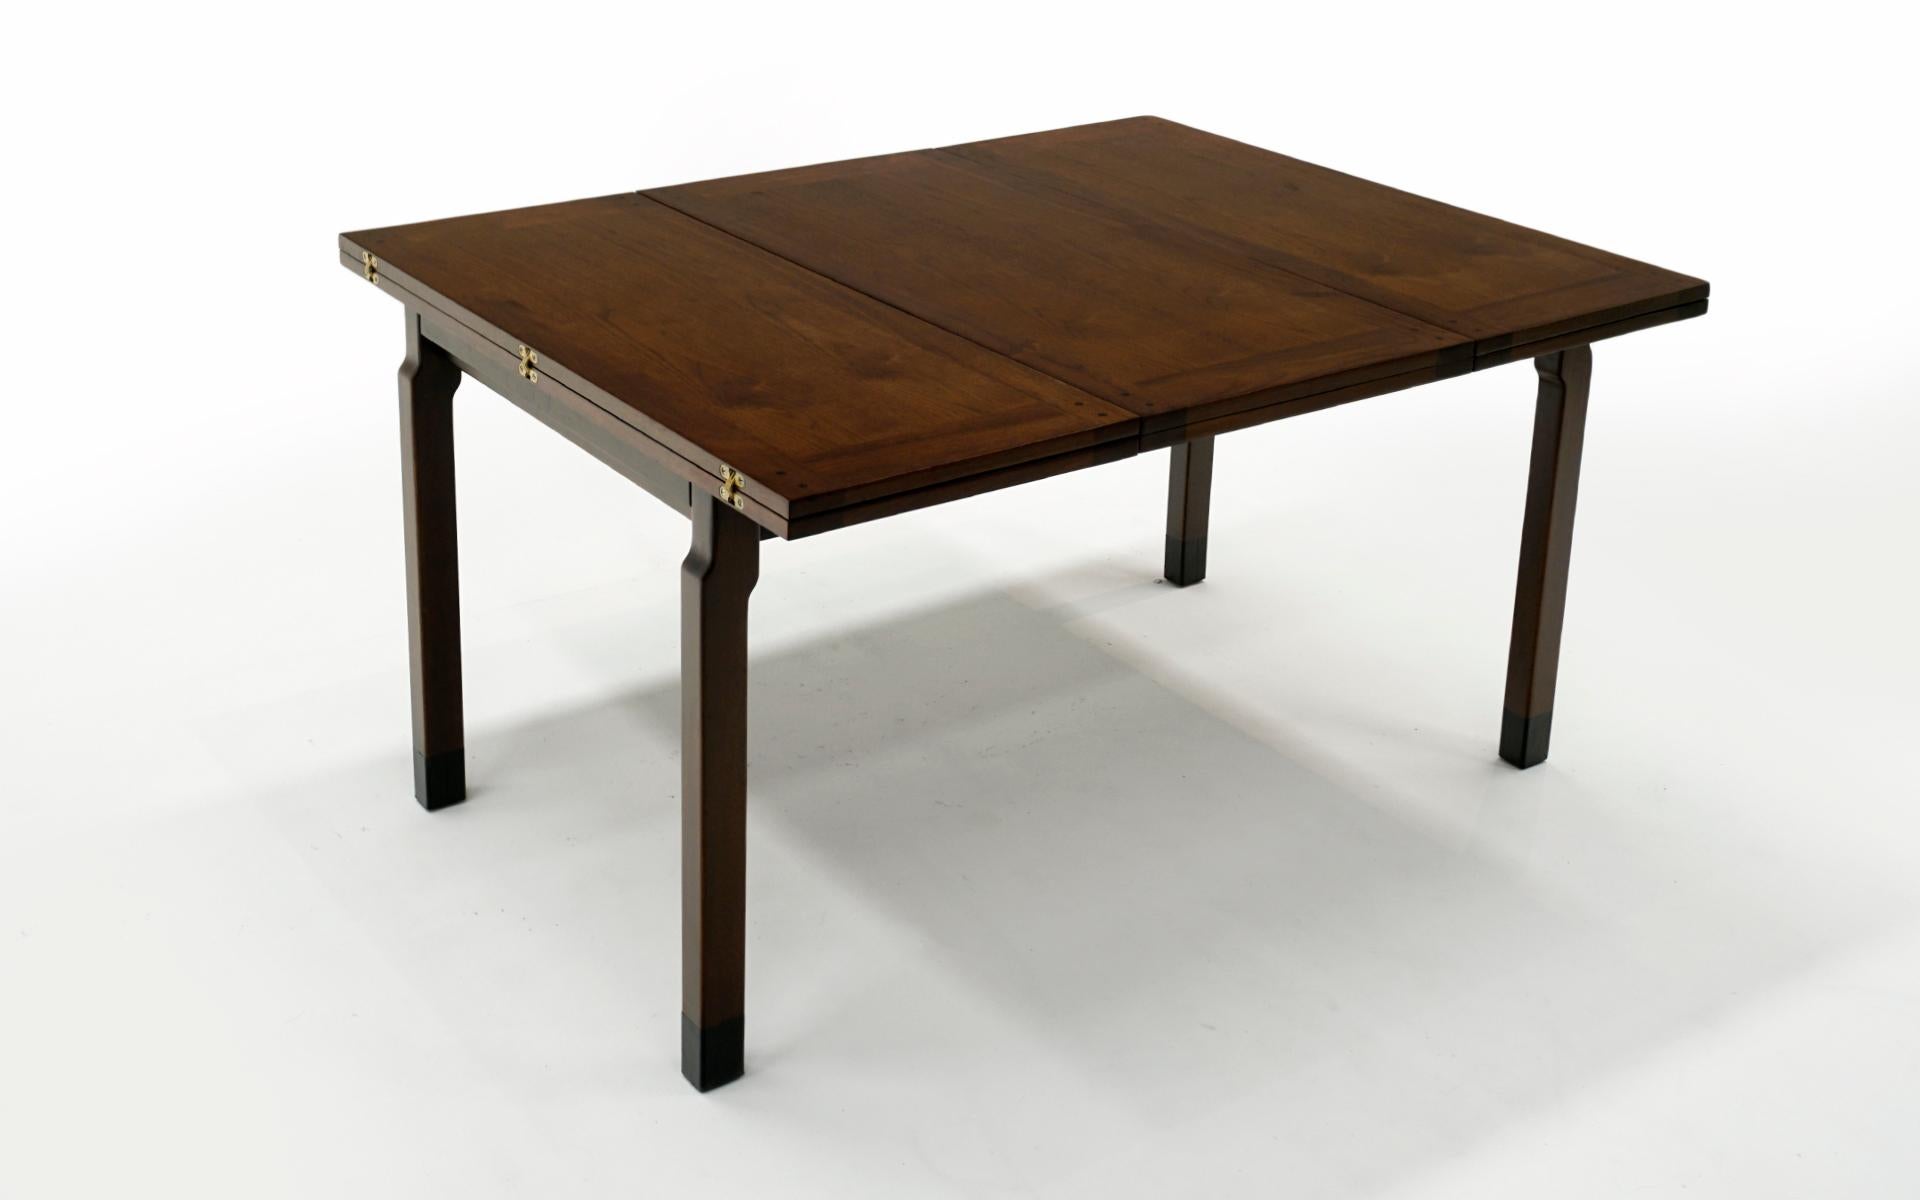 Very rare expandable dining table designed by Edward Wormley for Dunbar, 1950s.  Walnut with black leather anklets and brass hardware.  The table starts at 54 inches wide and extends to 84 inches wide when extending the two 15 inch stored leaves. 